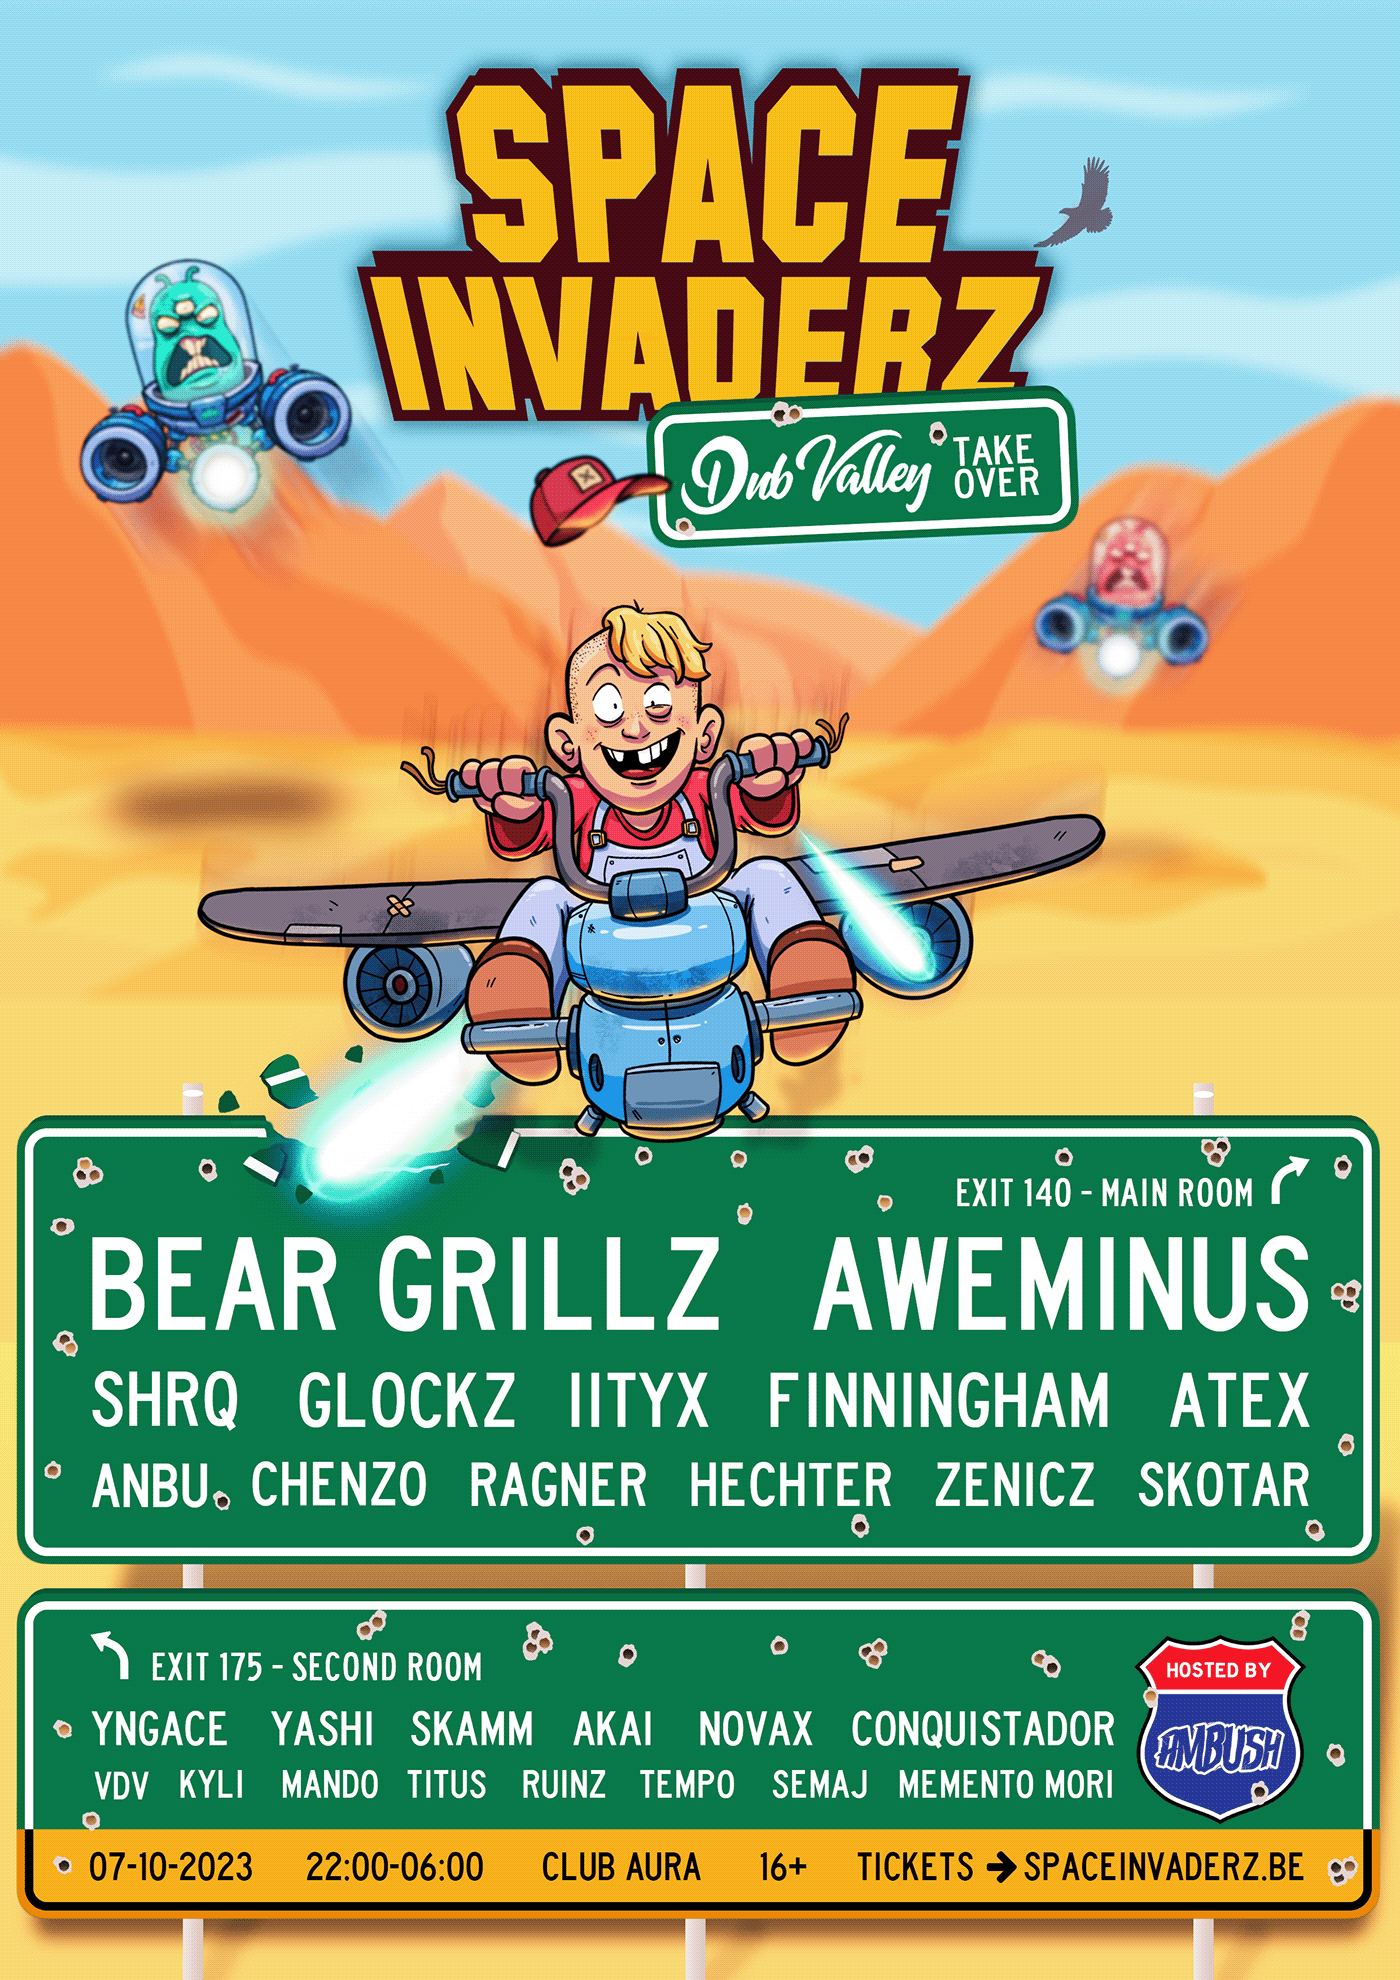 riddim dubstep Drum and Bass party flyer poster Event bear grillz Aweminus space invaderz